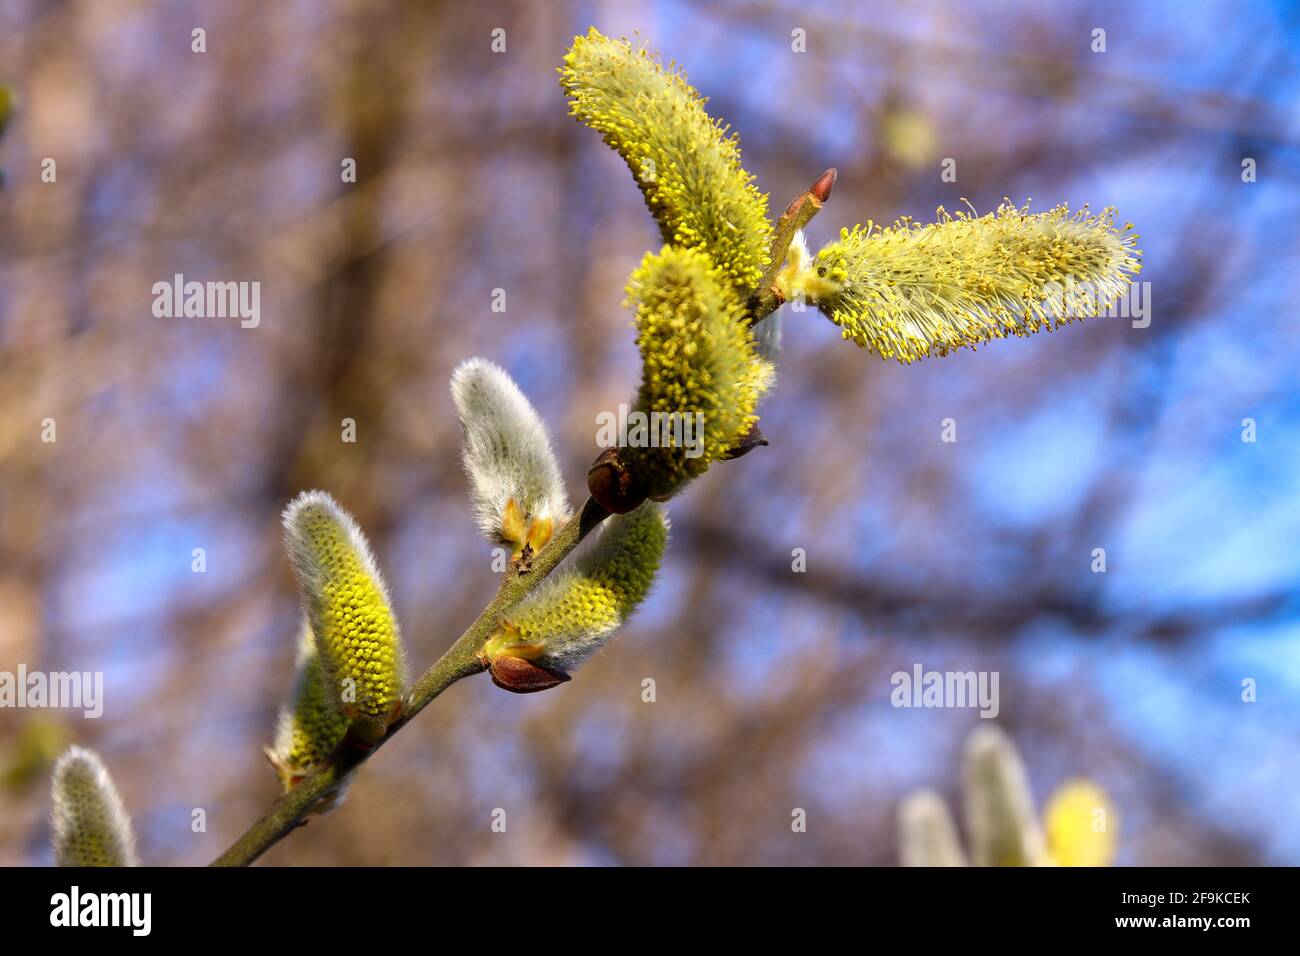 Tree buds in spring. Young large buds on branches against blurred background. Stock Photo